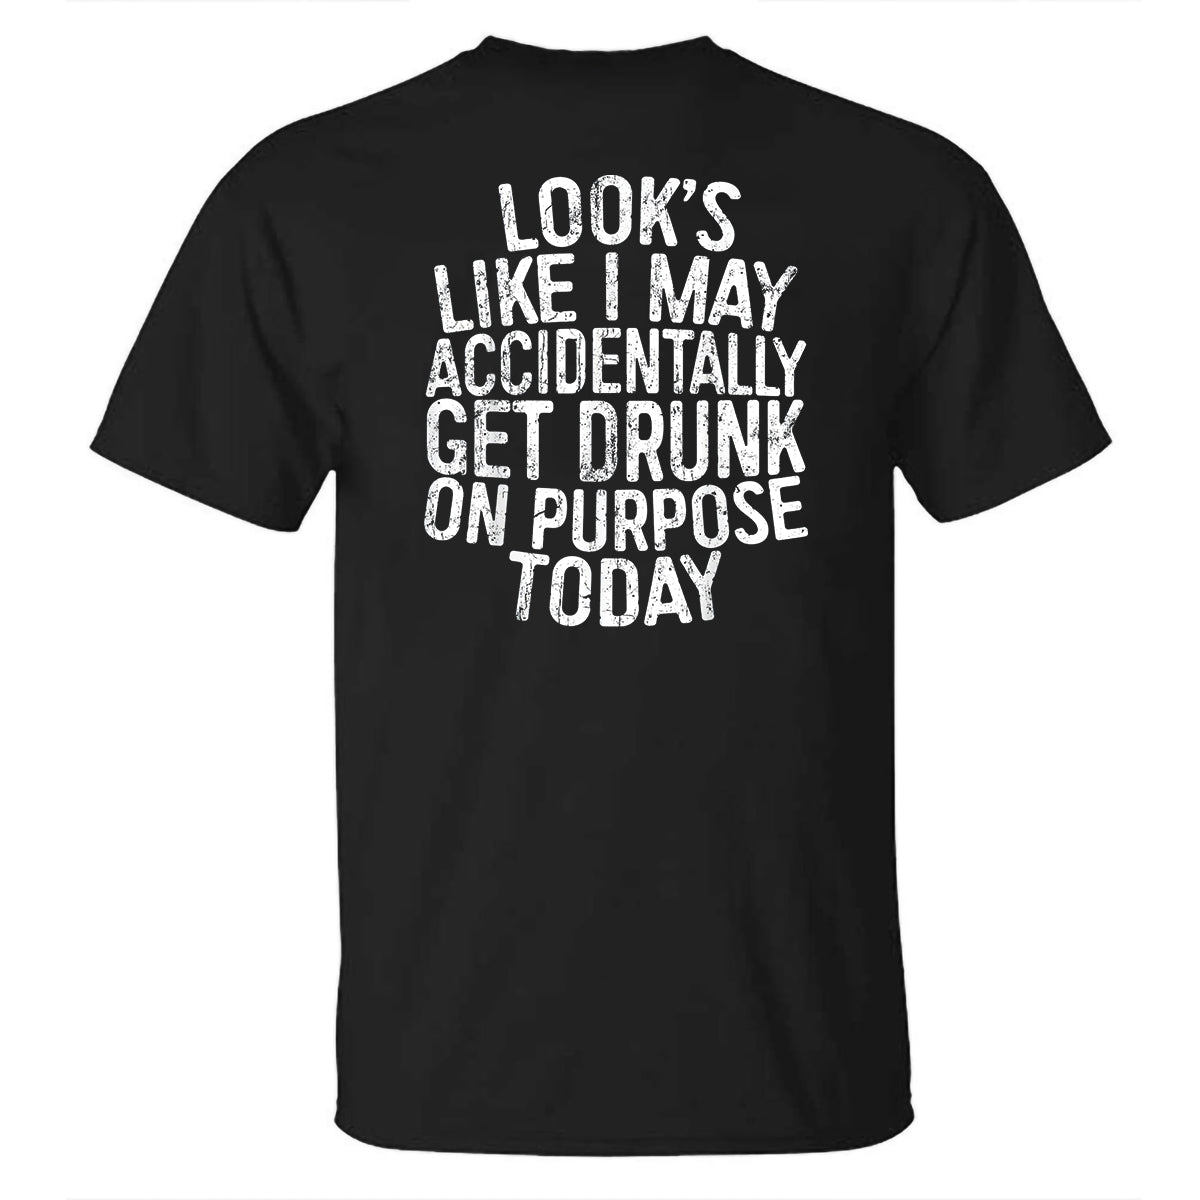 Look's Like I May Accidentally Get Drunk On Purpose Today Printed T-shirt